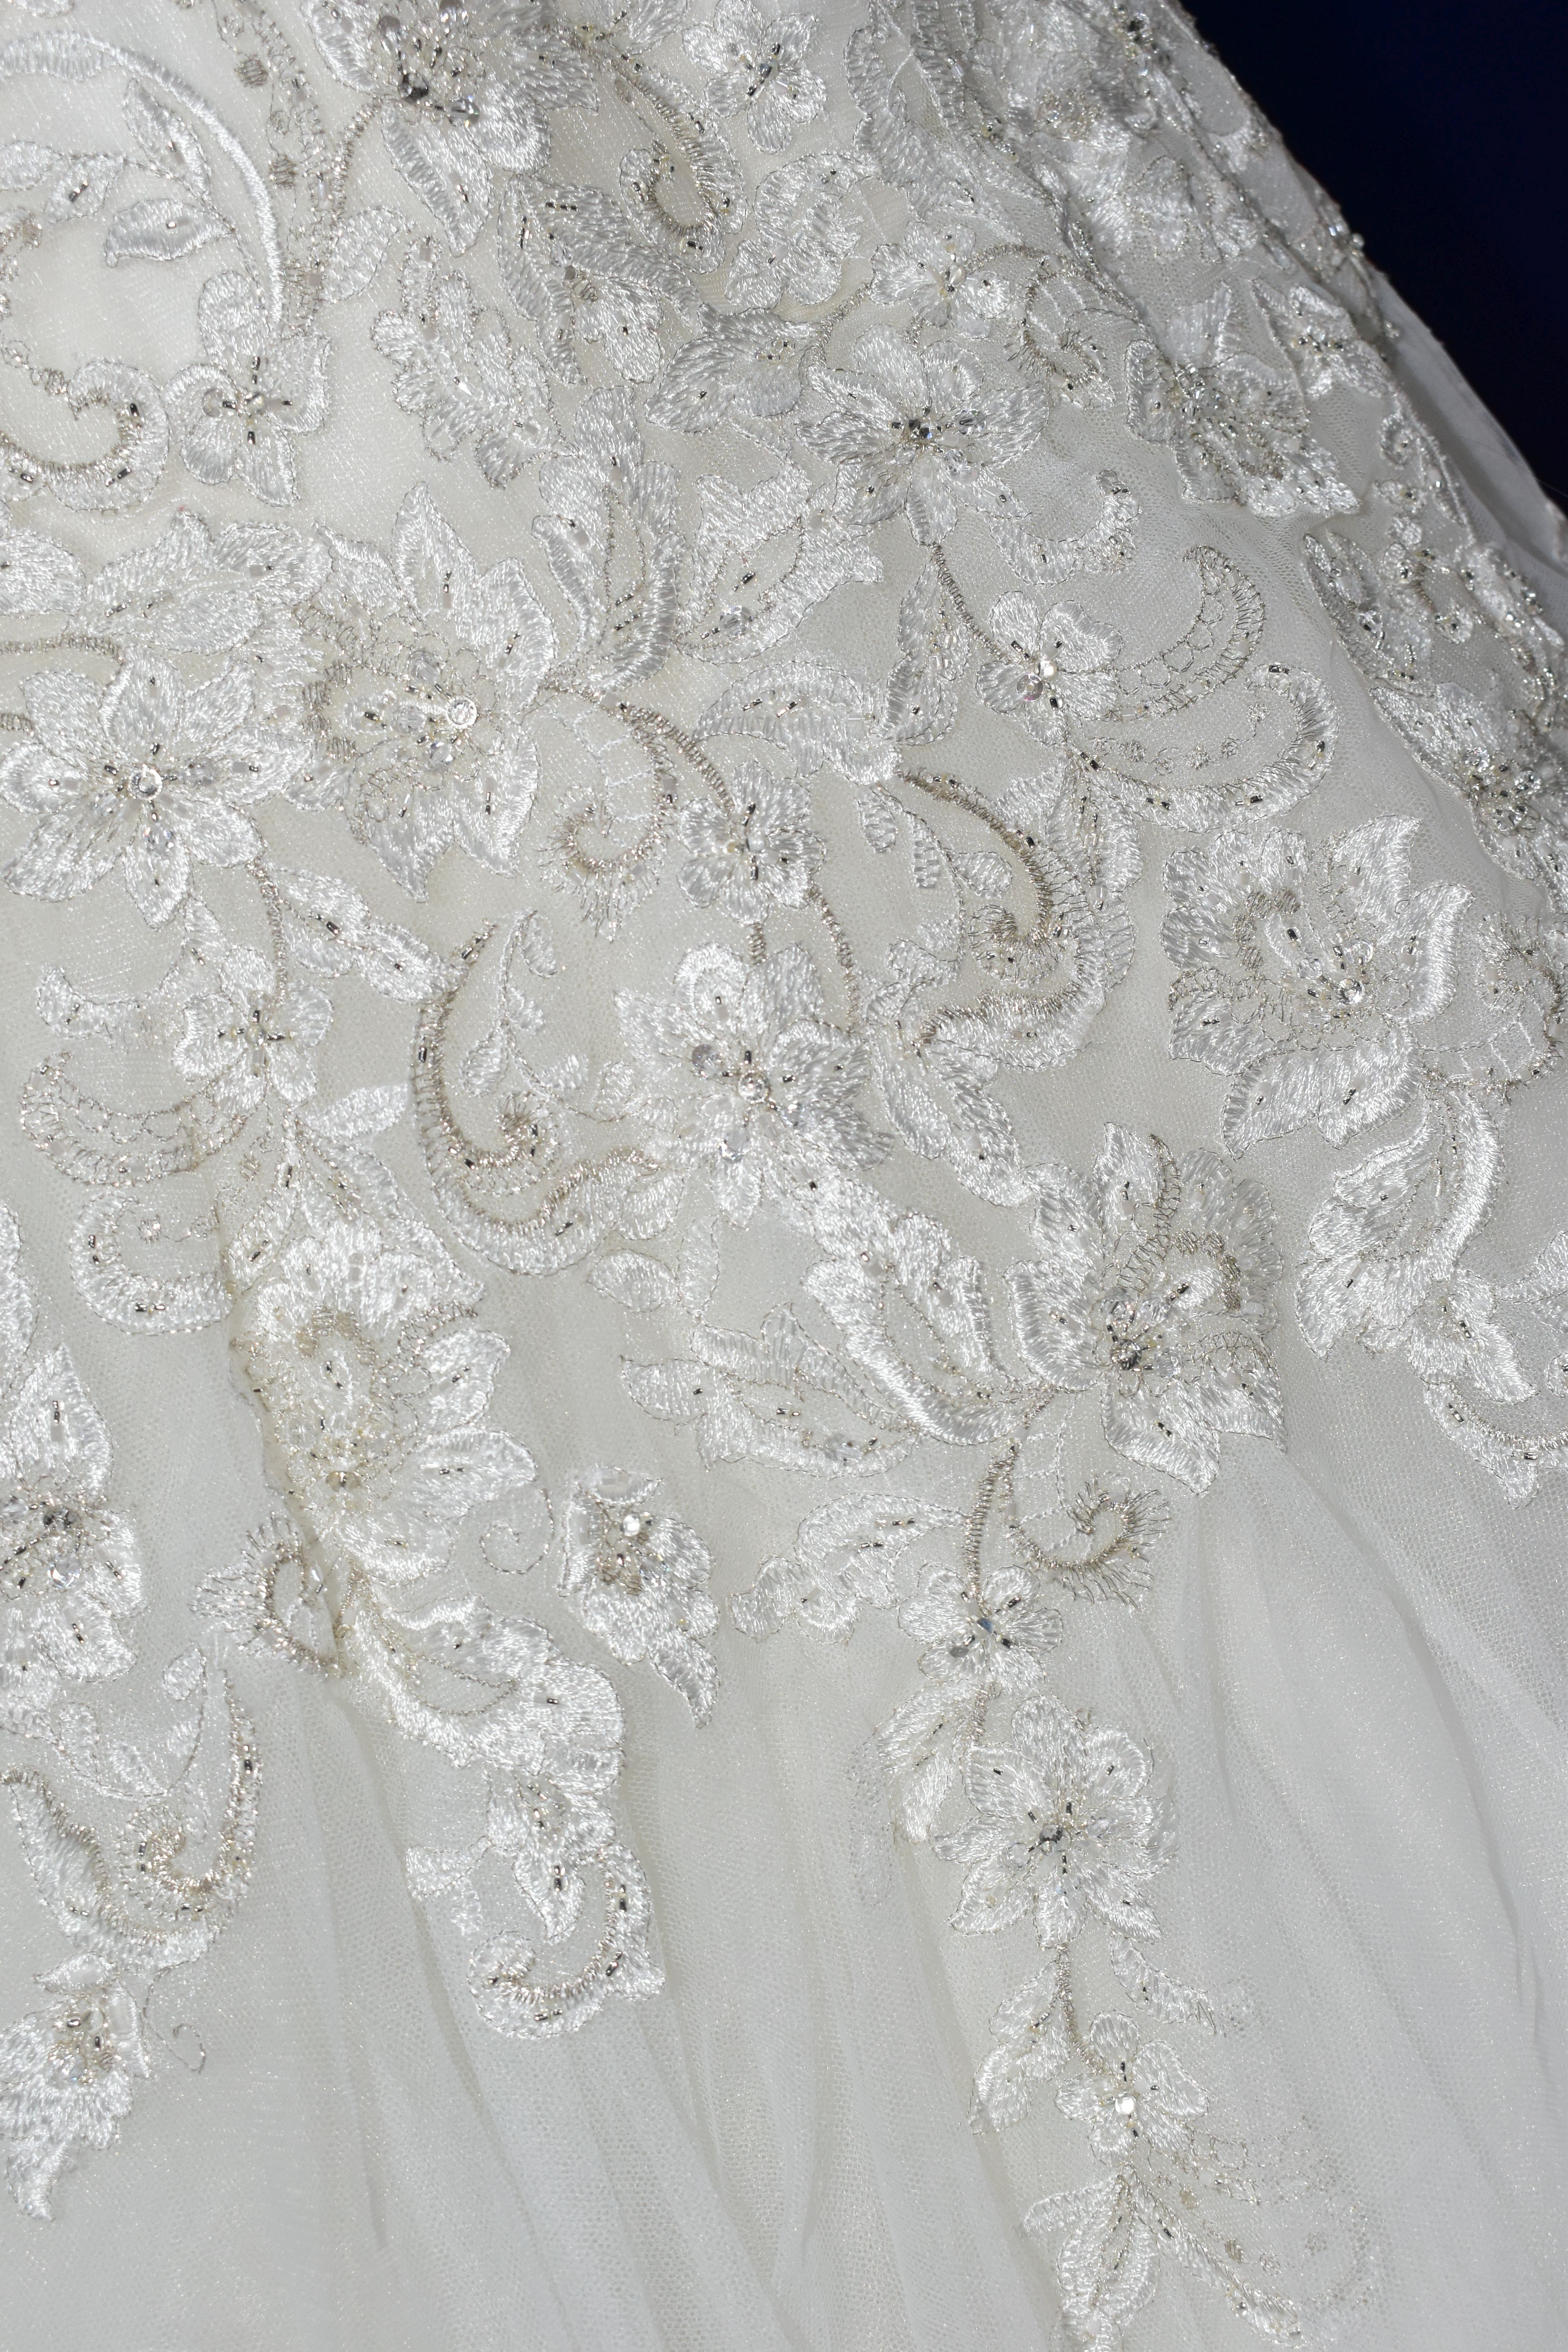 WEDDING DRESS, 'Sophia Tolli', ivory, size 6, beaded appliques, button detail along back, dropped - Image 15 of 16